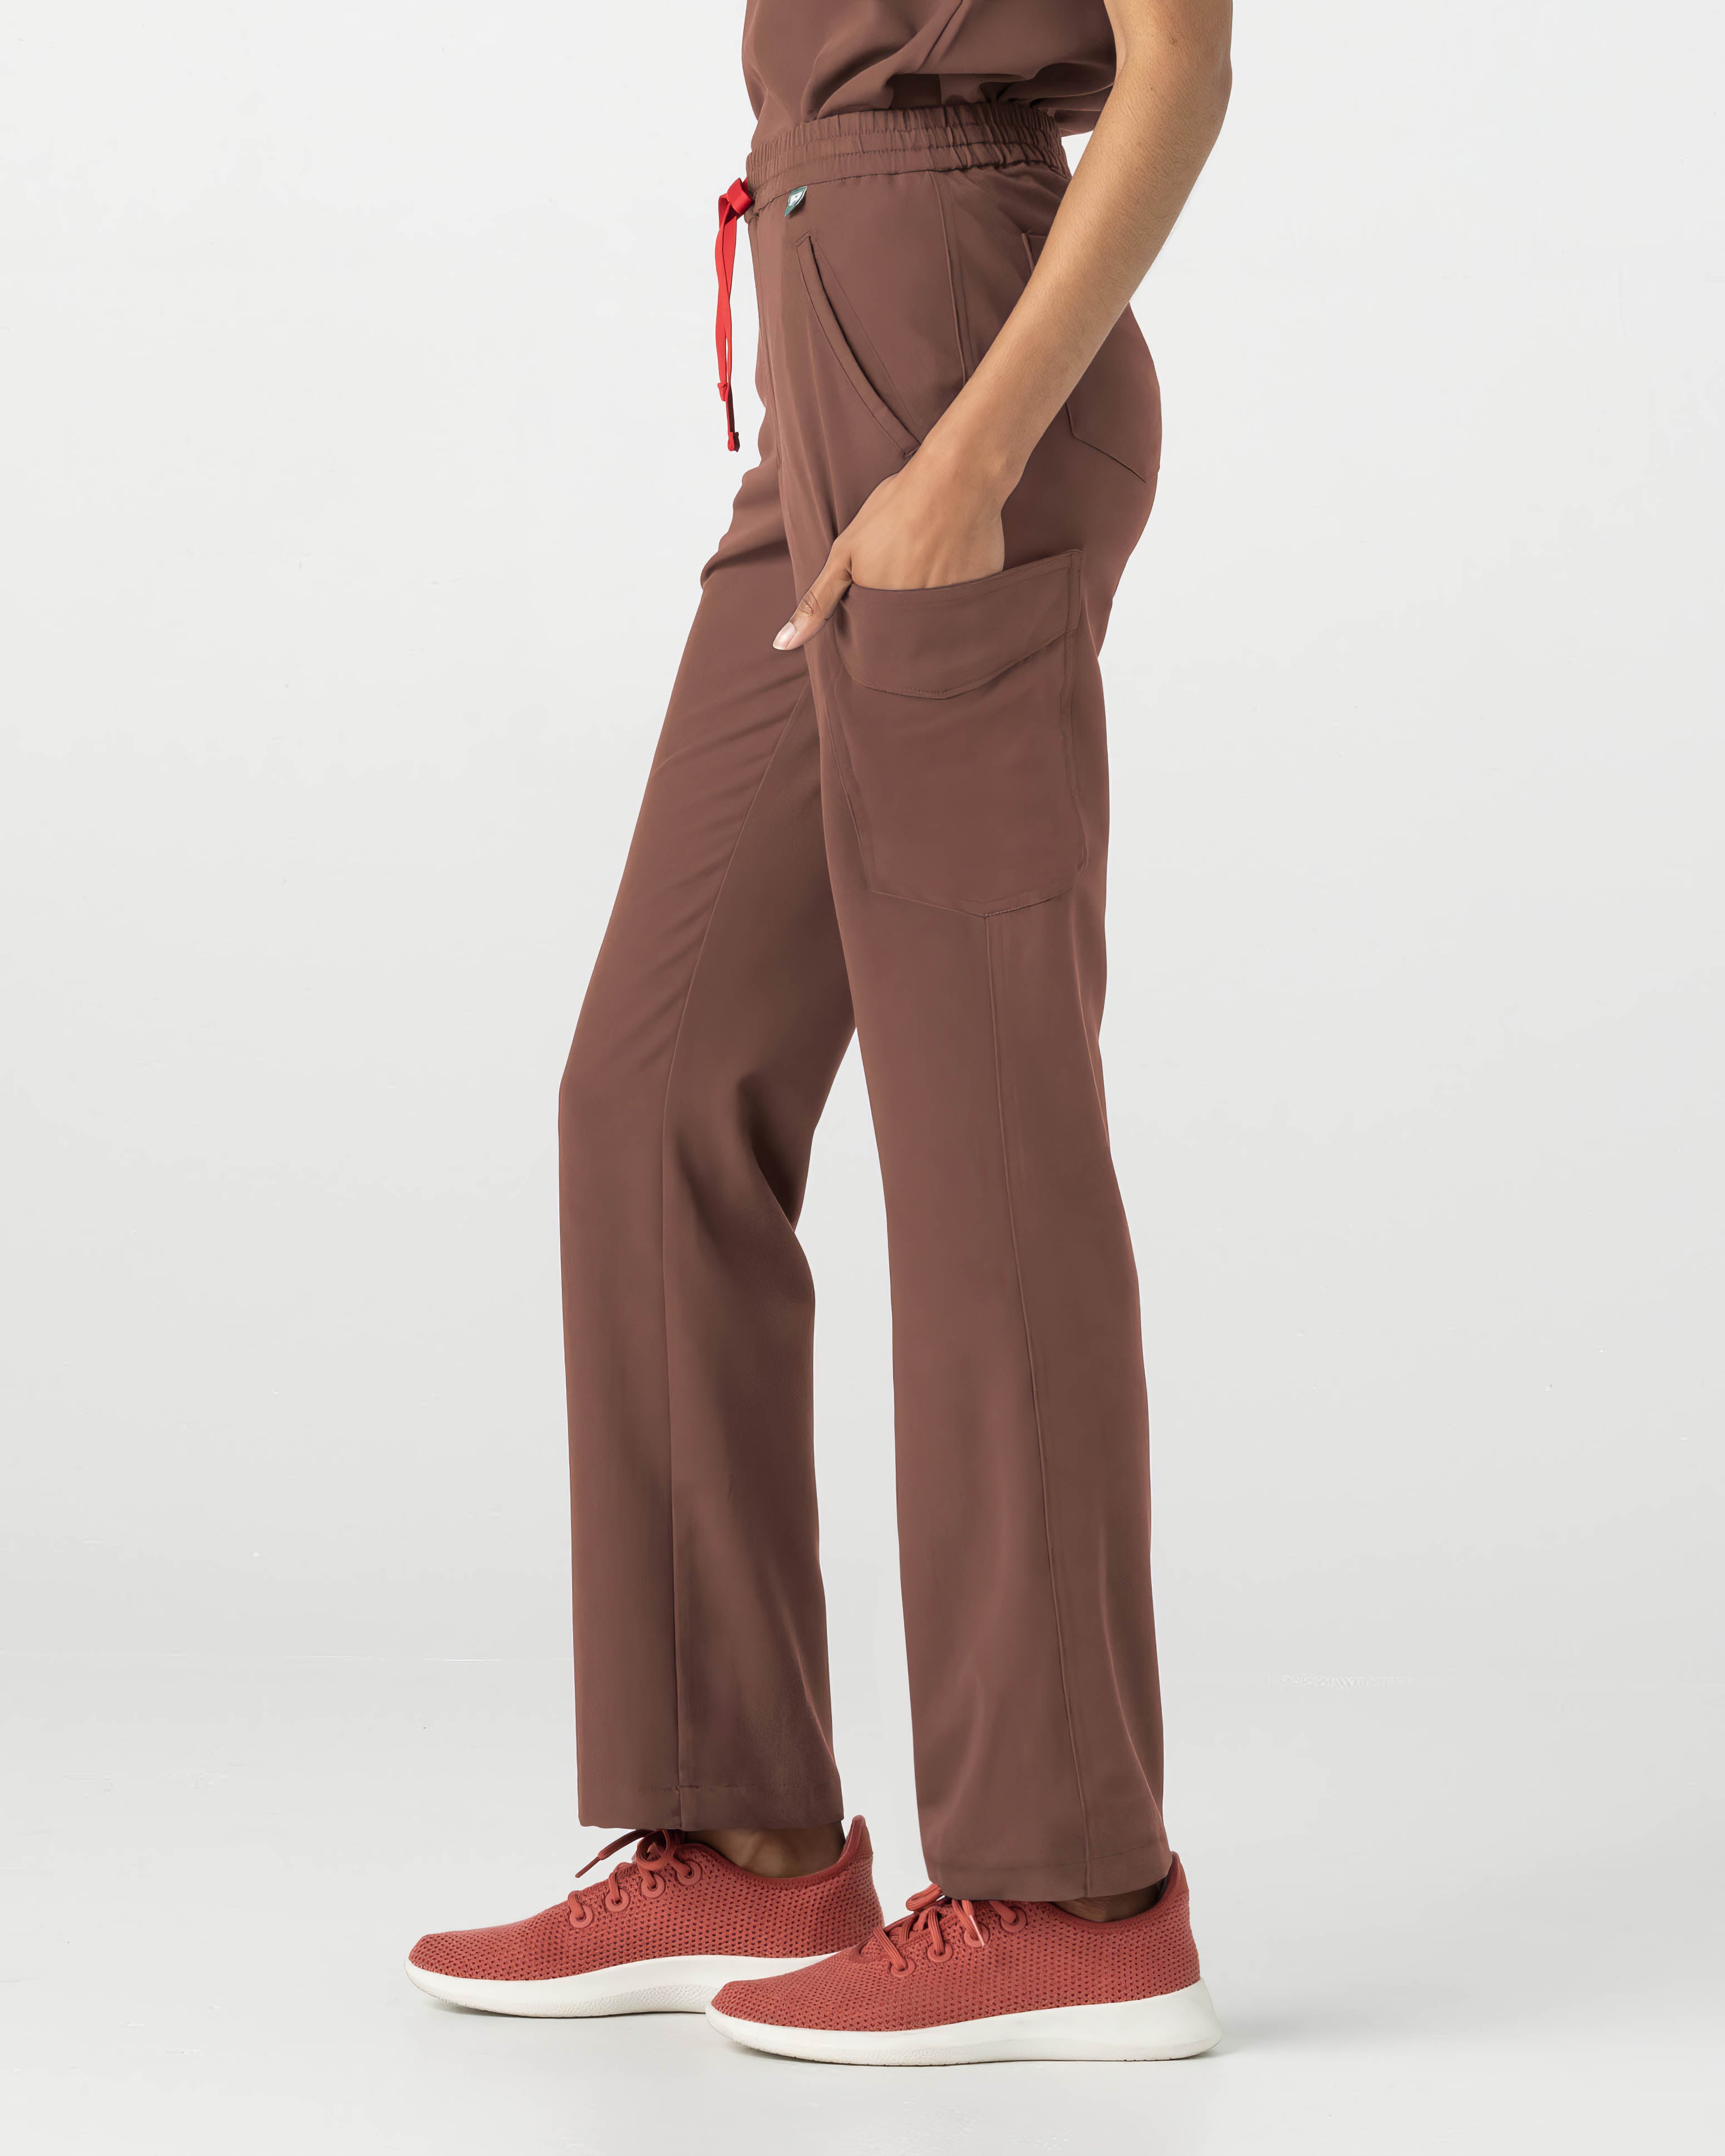 Shop Sustainable Women's Medical Uniforms and Scrubs